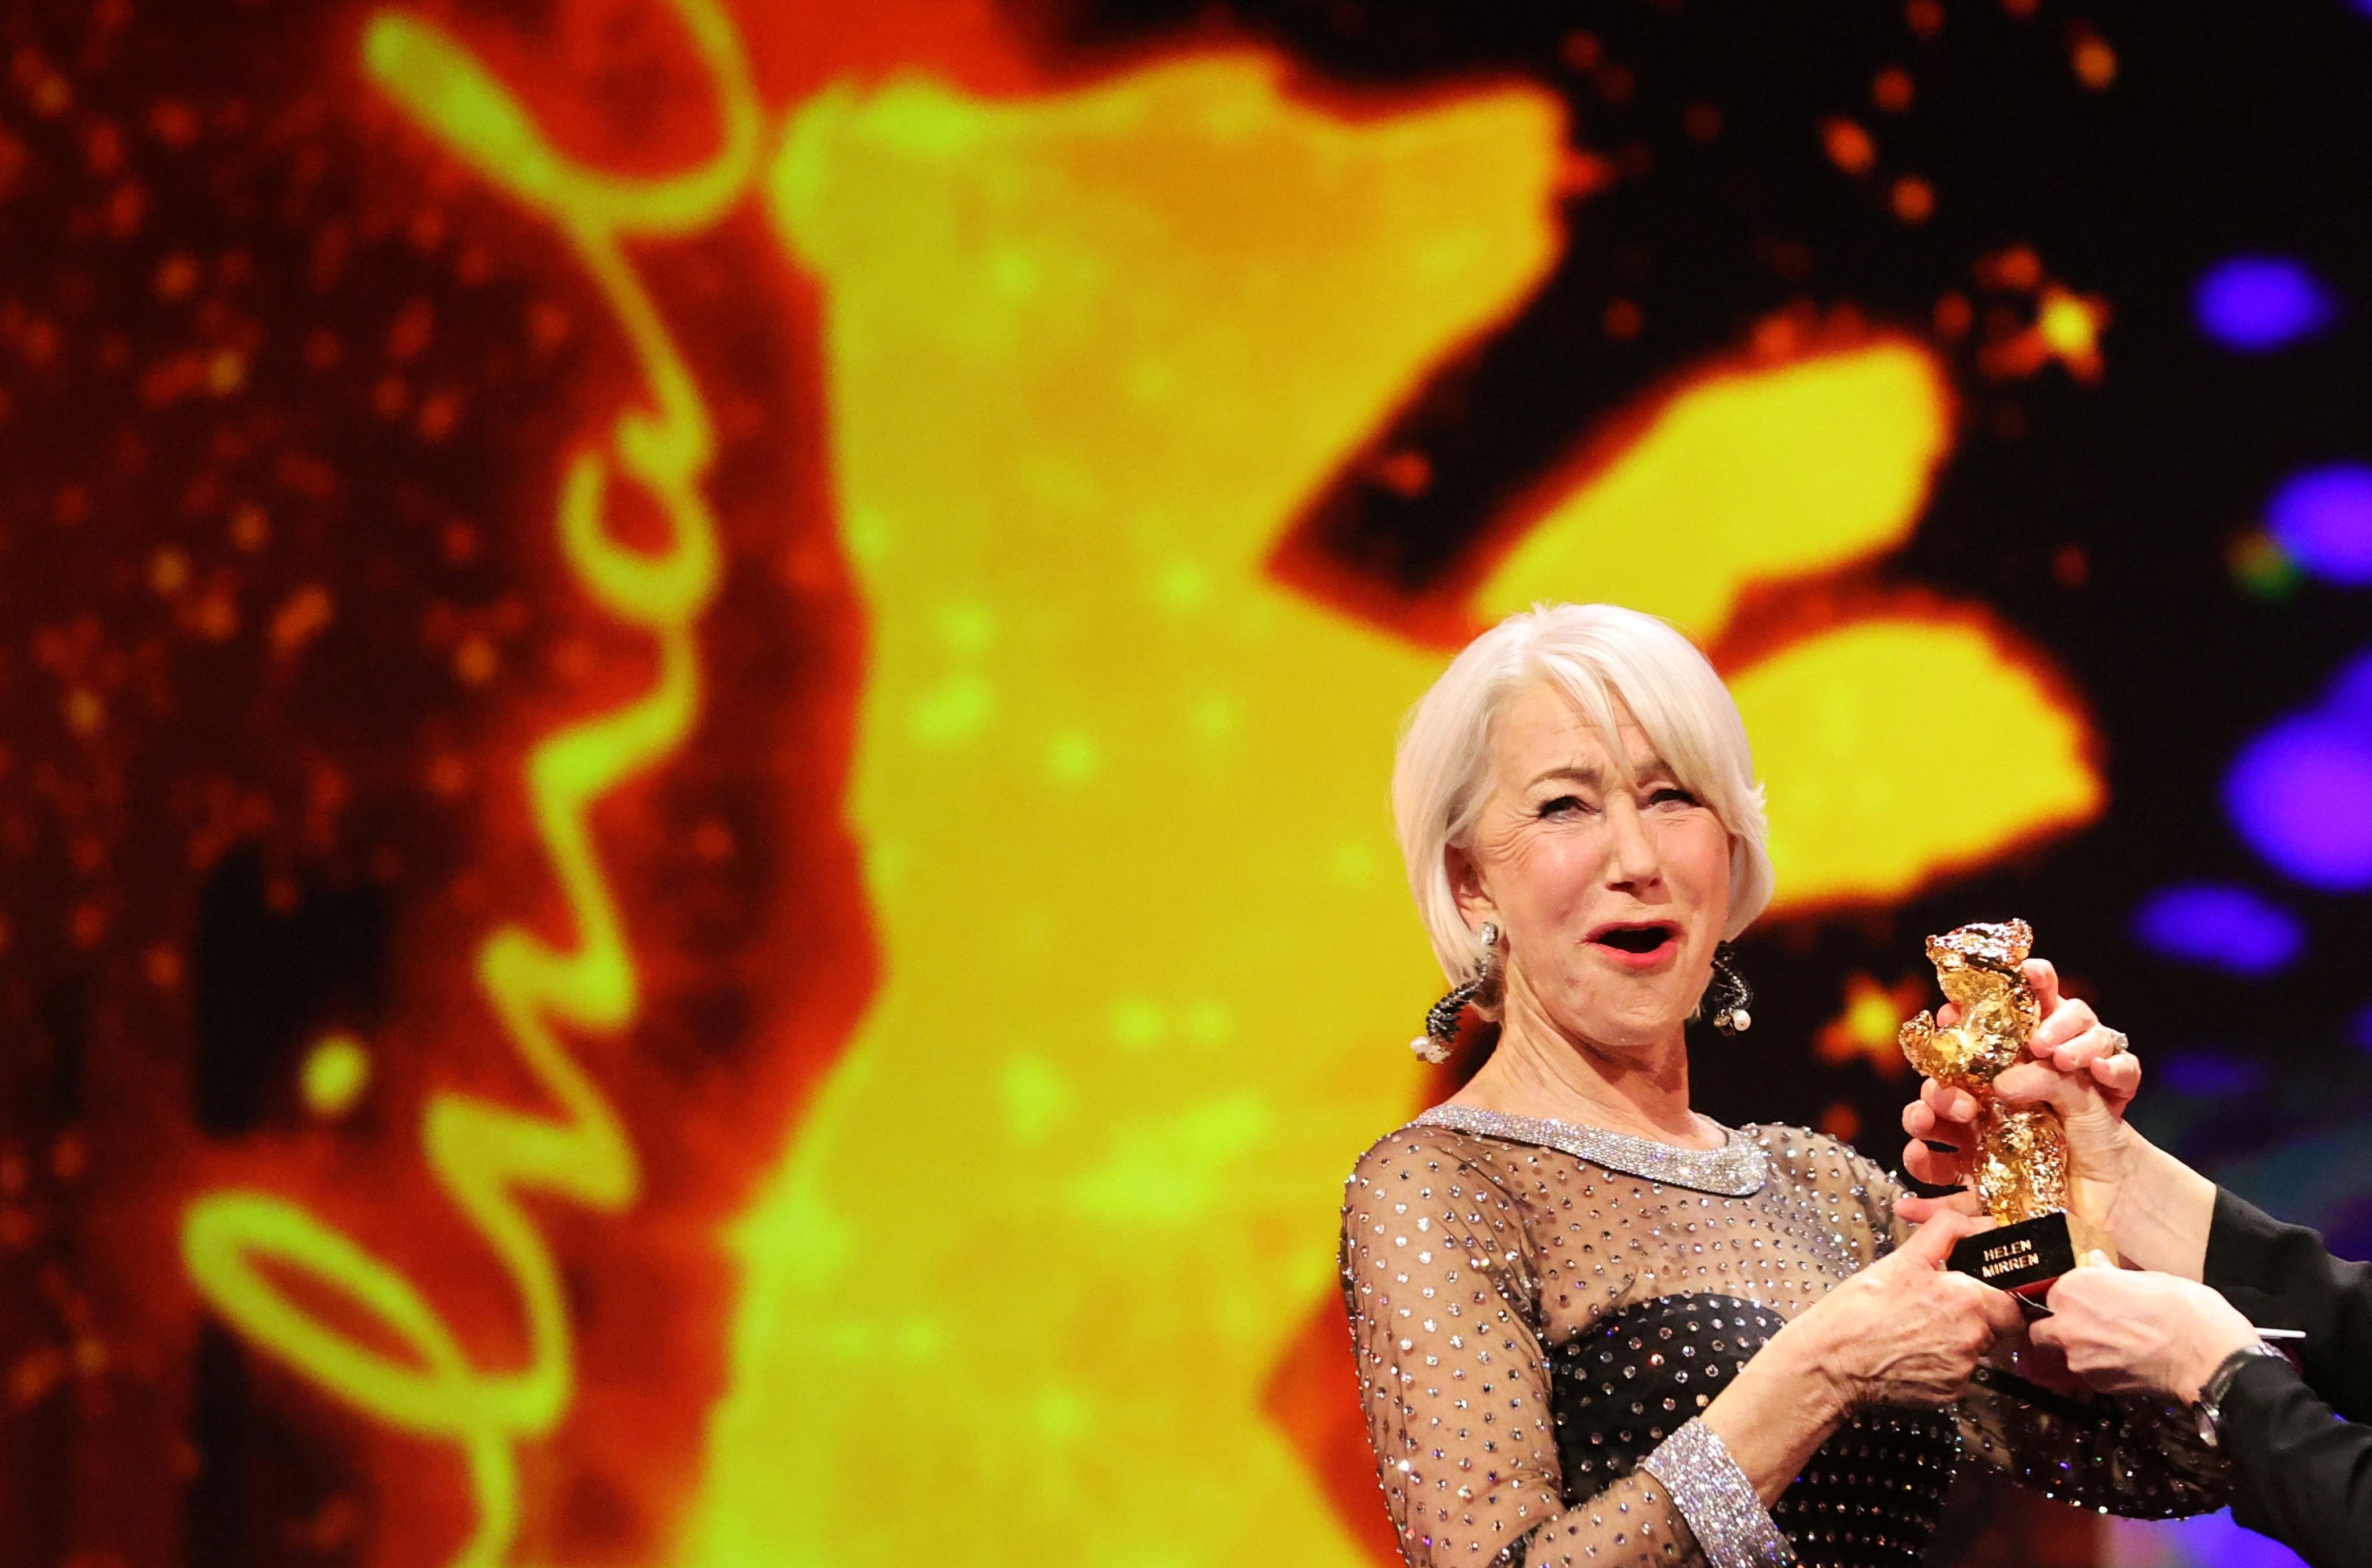 Actor Helen Mirren accepts an Honorary Golden Bear award at the 70th Berlinale International Film Festival in Berlin, Germany, Feb. 27, 2020. (REUTERS)